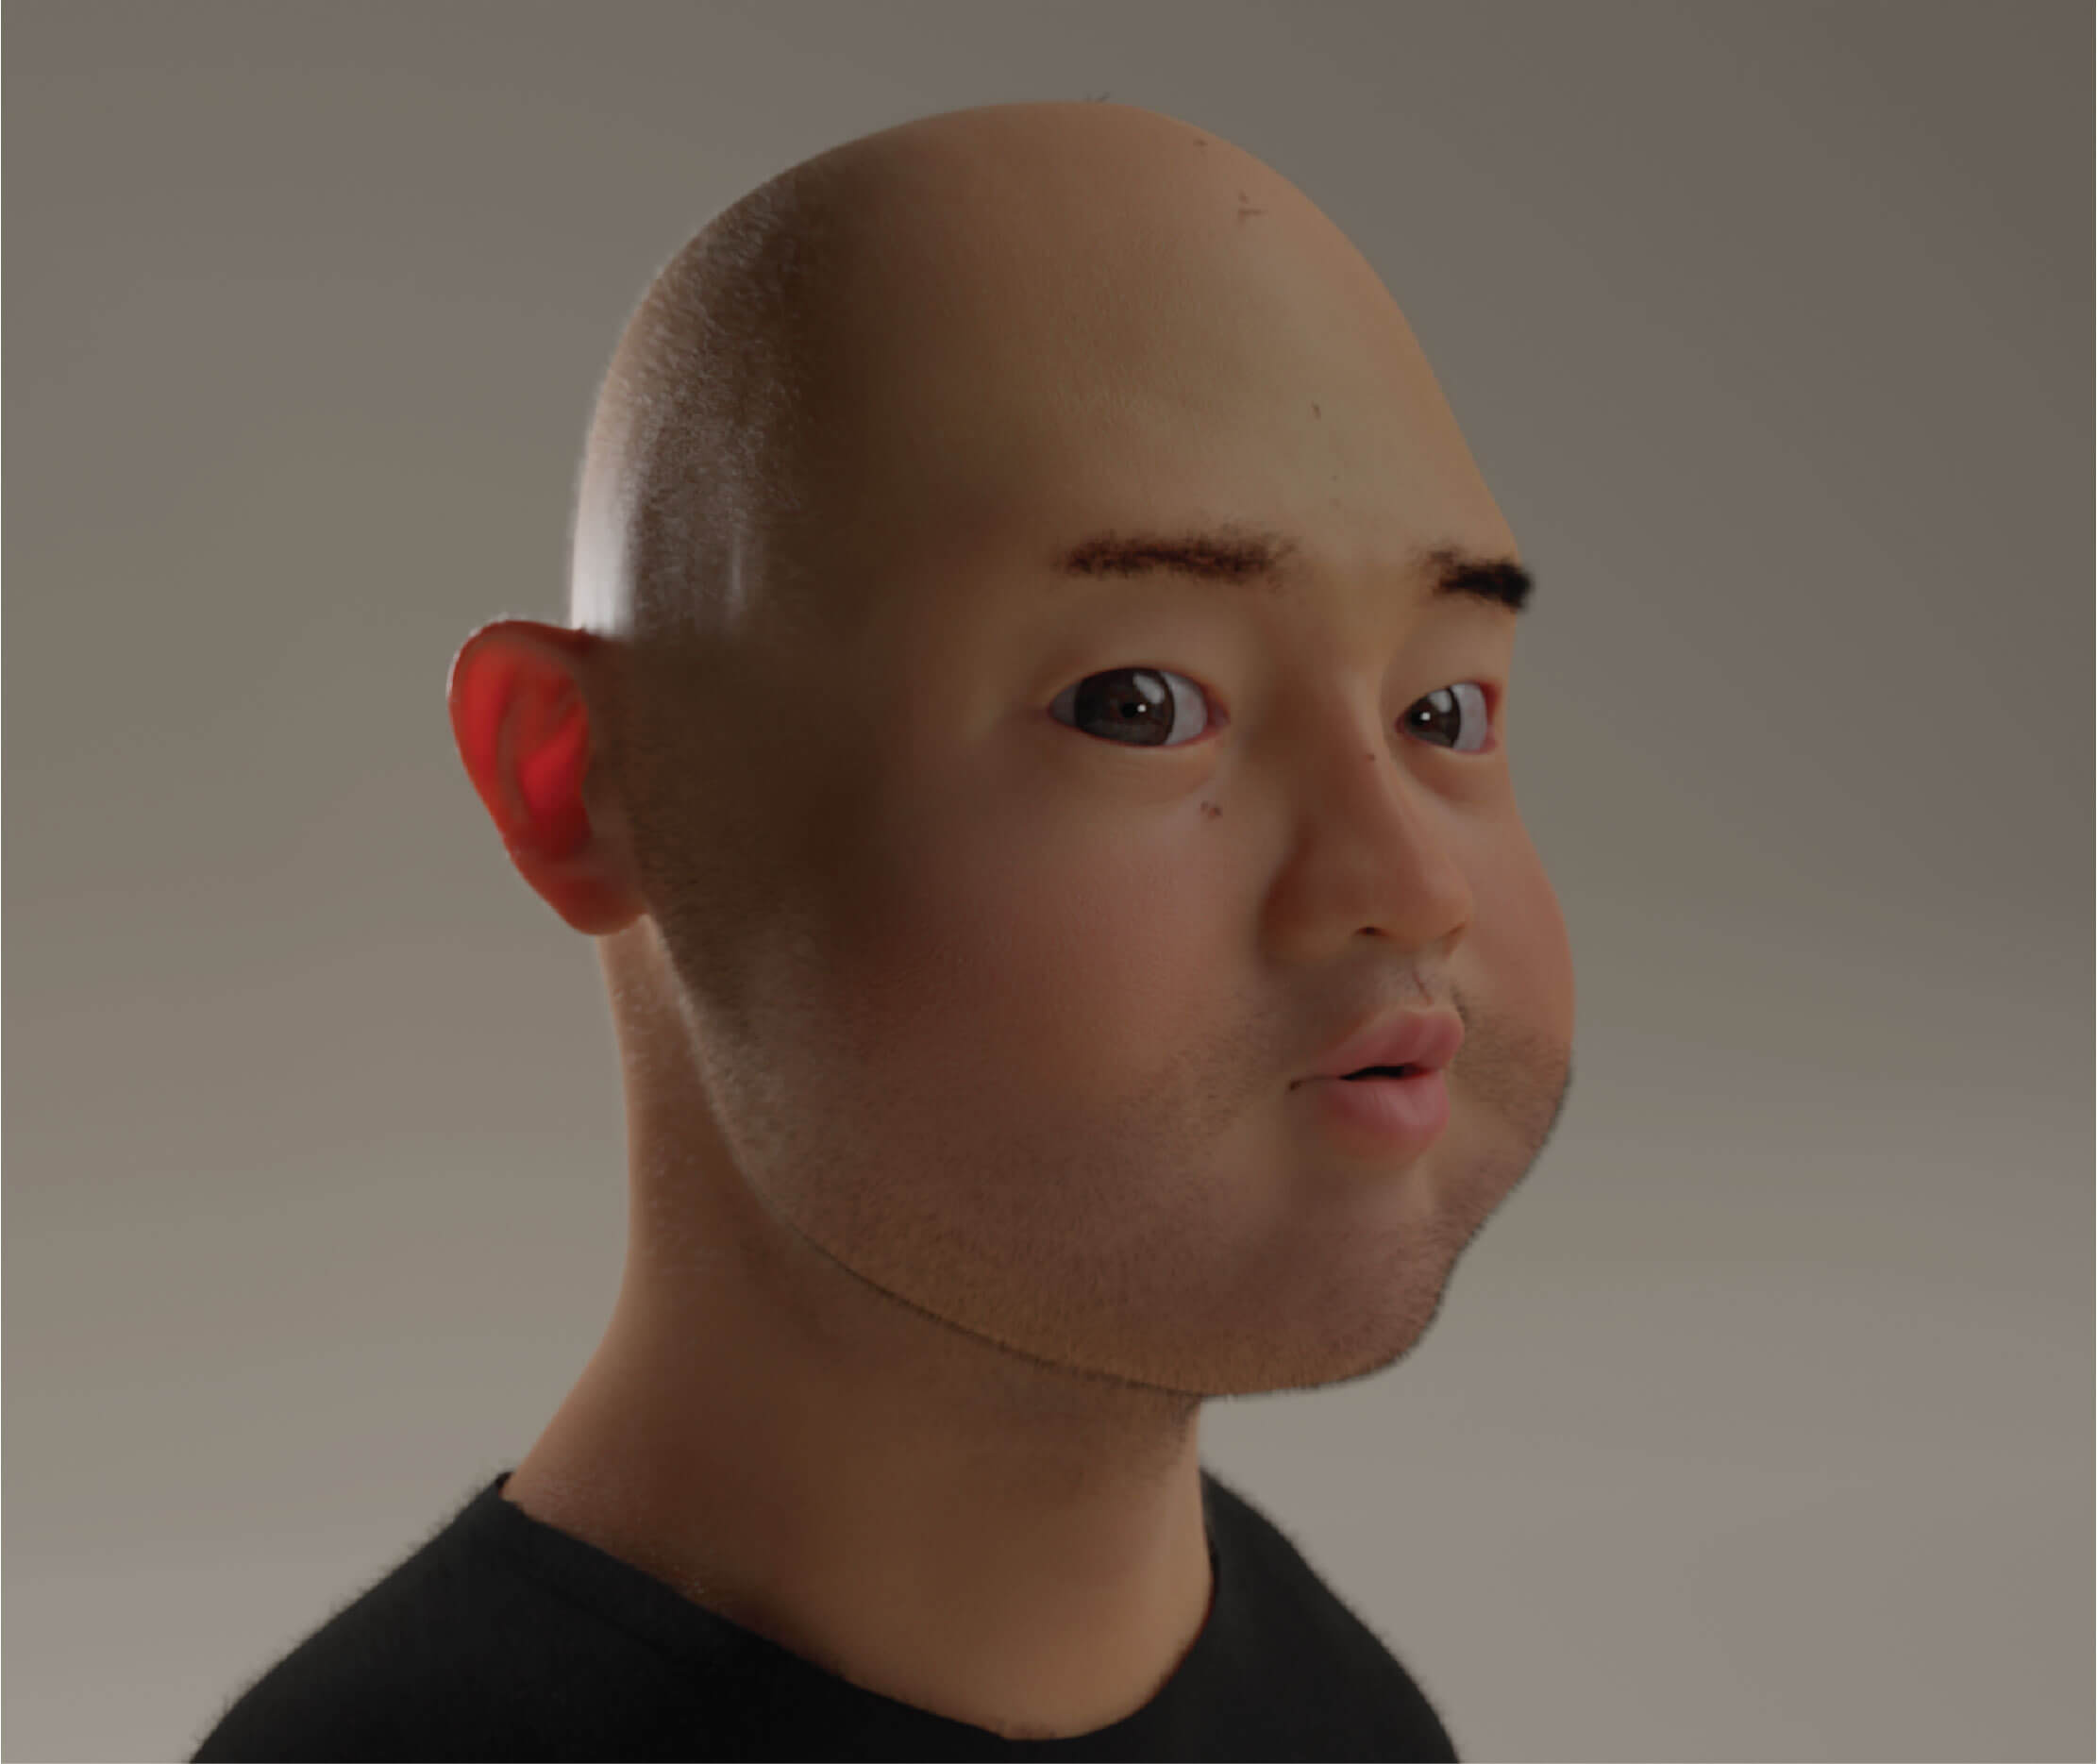 Human face render #1 with blown up cheeks